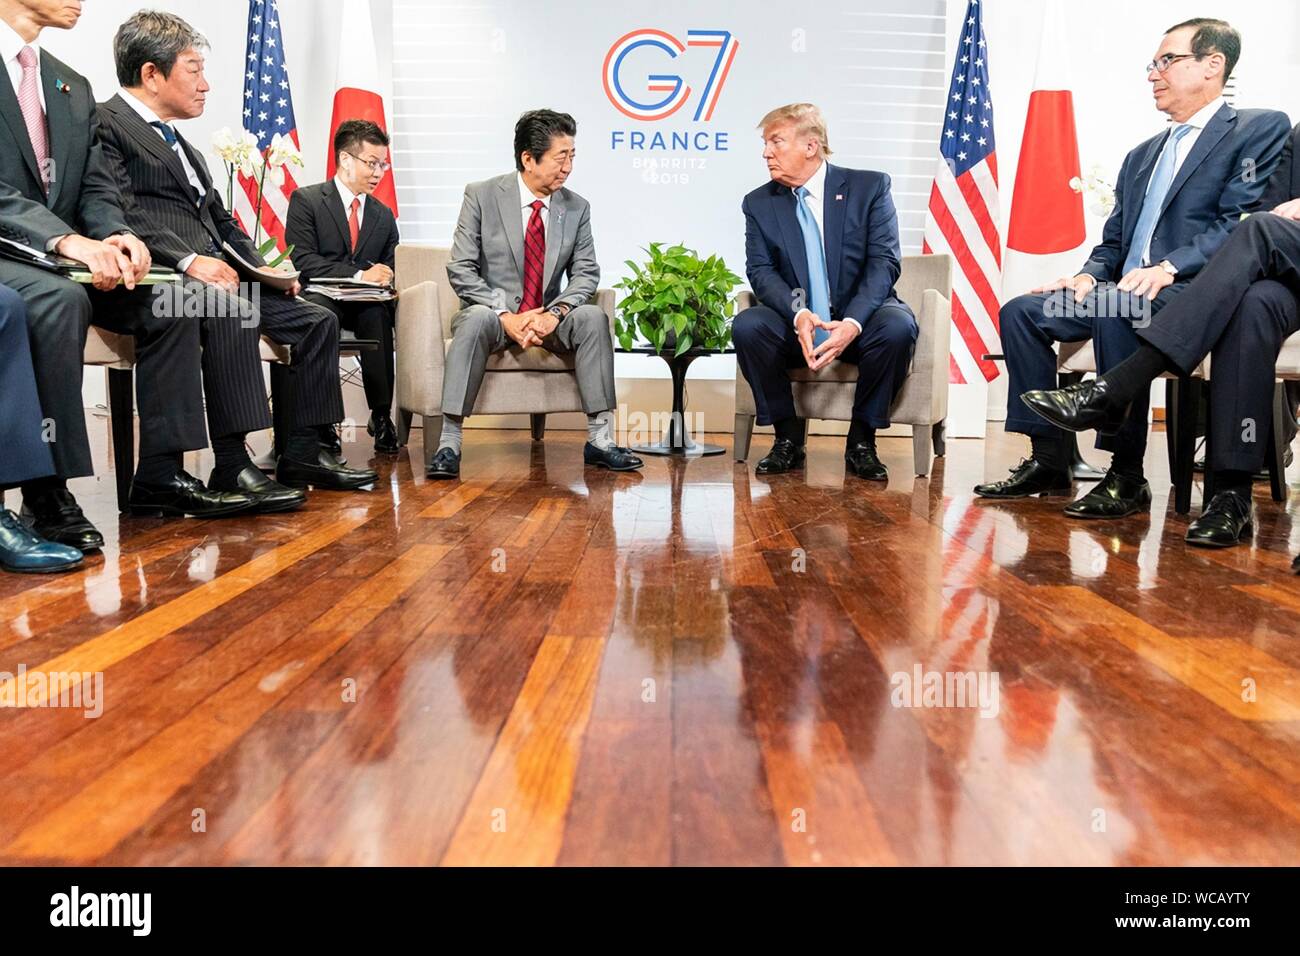 U.S. President Donald Trump, right, with Japanese Prime Minister Shinzo Abe, left, prior to their trade meeting on the sidelines of the G7 Summit at the Centre de Congrés Bellevue August 25, 2019 in Biarritz, France. Stock Photo